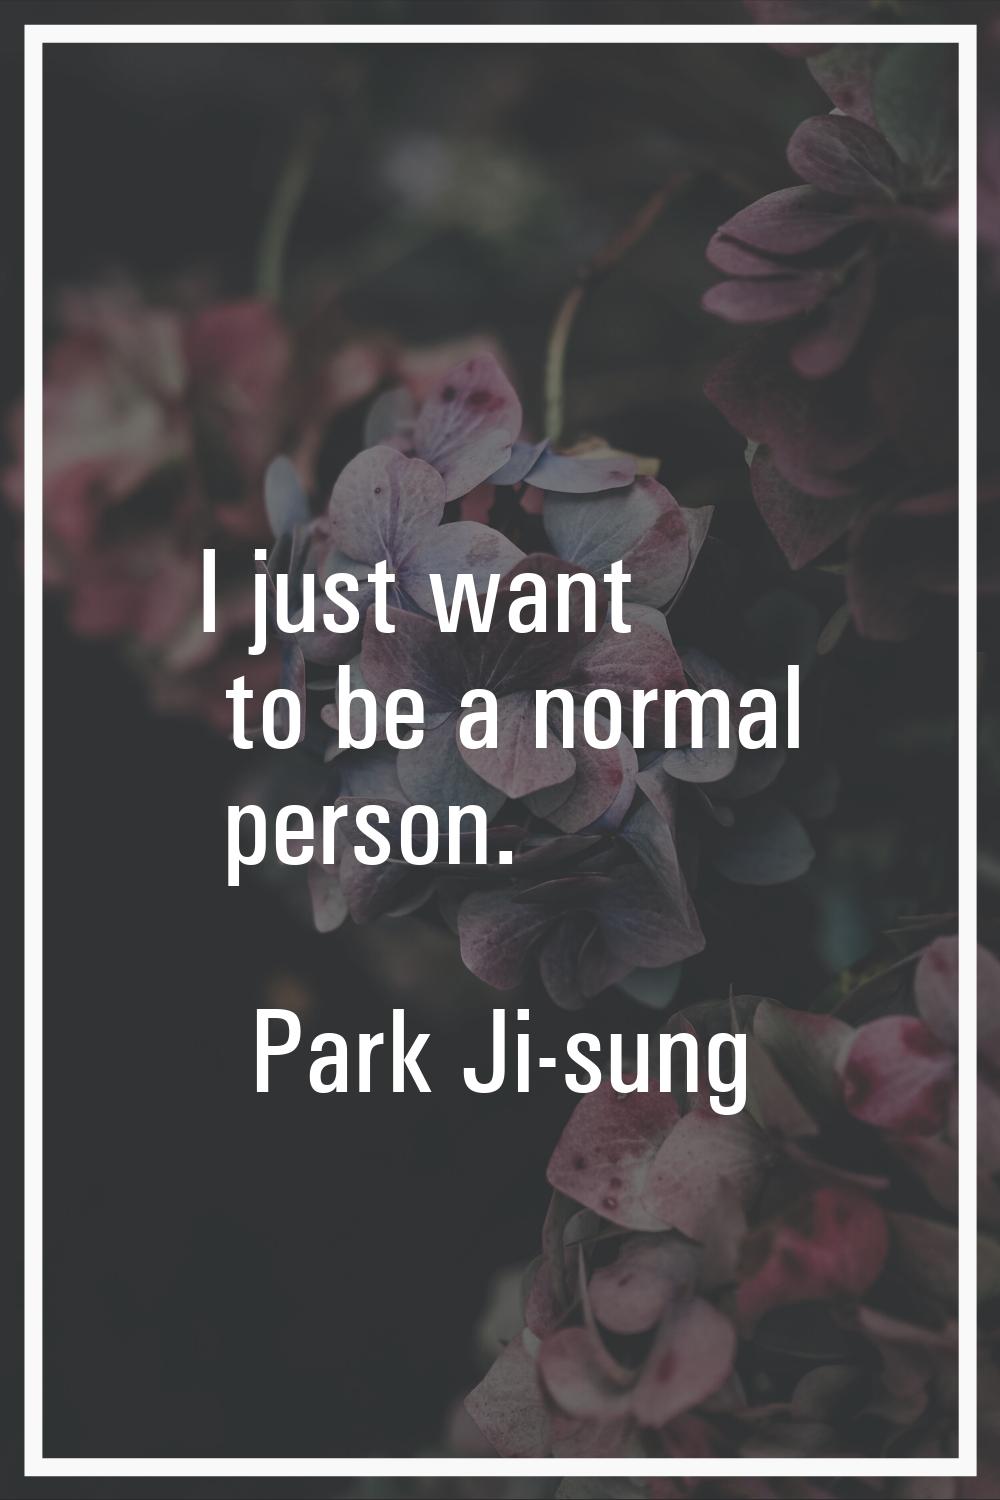 I just want to be a normal person.